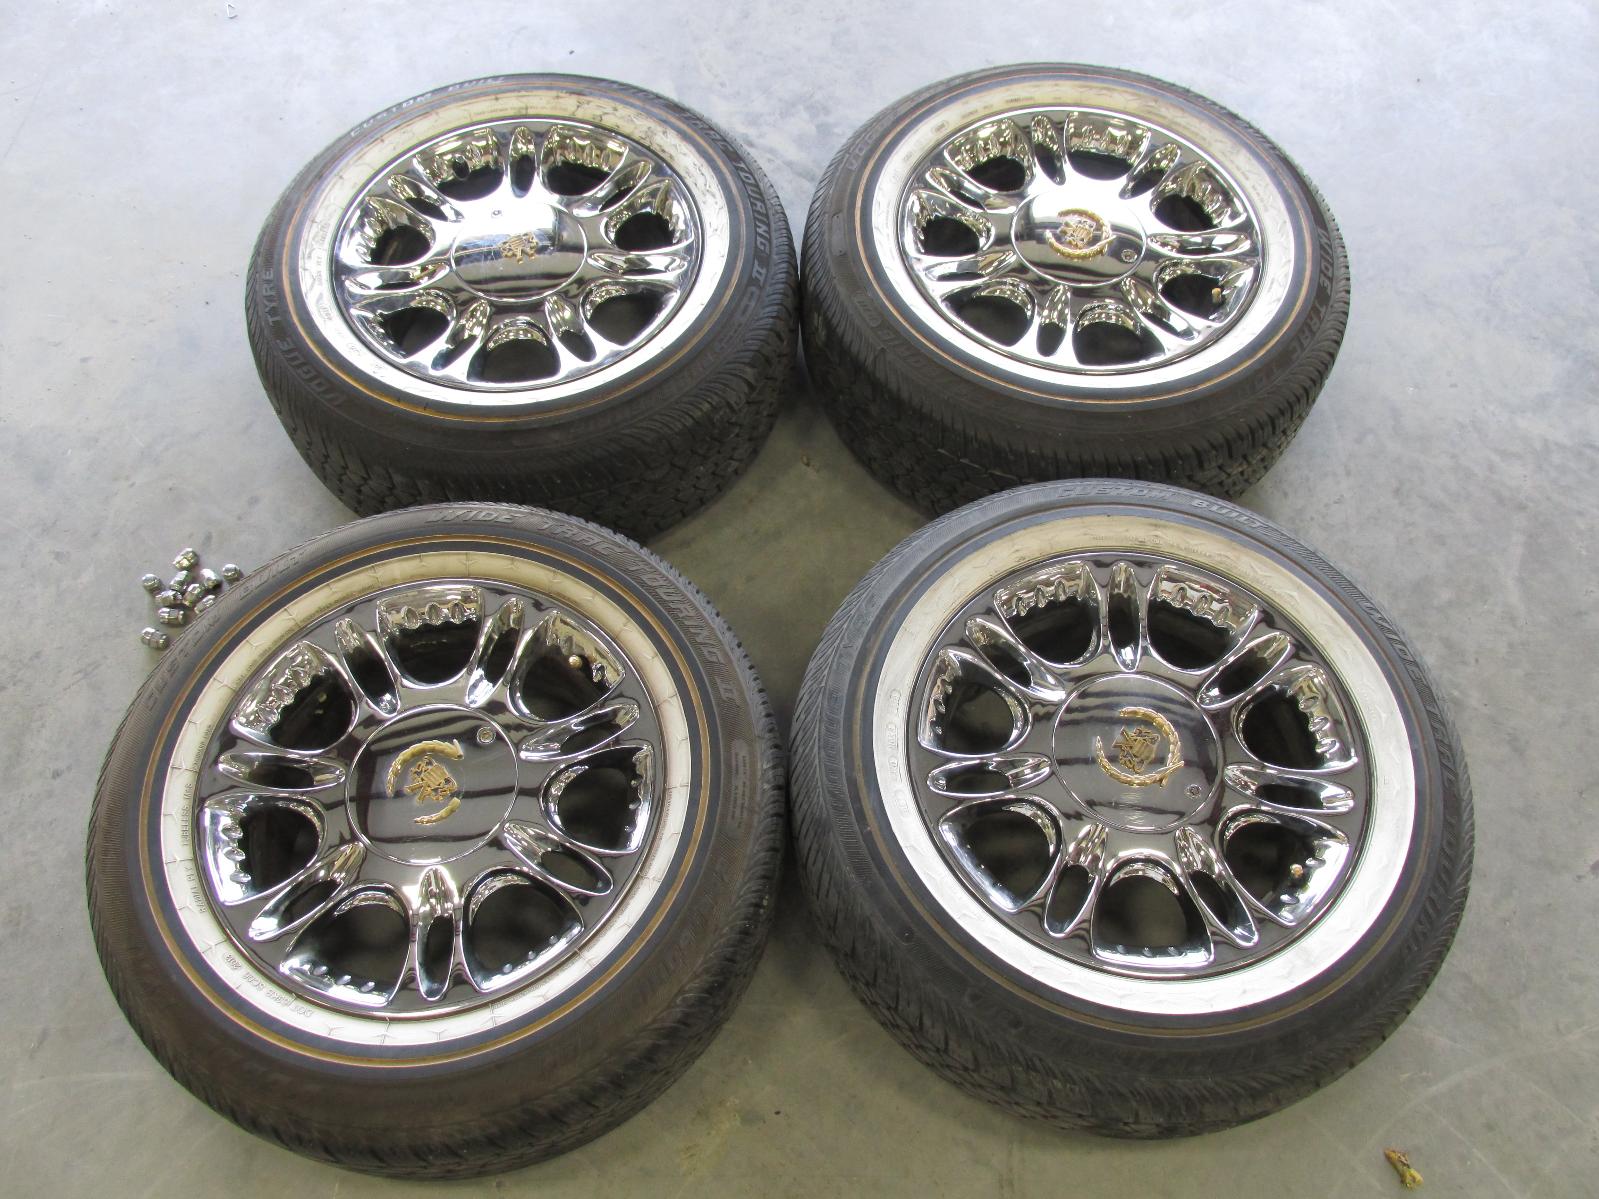 Cadillac Rims with Vogue Tires